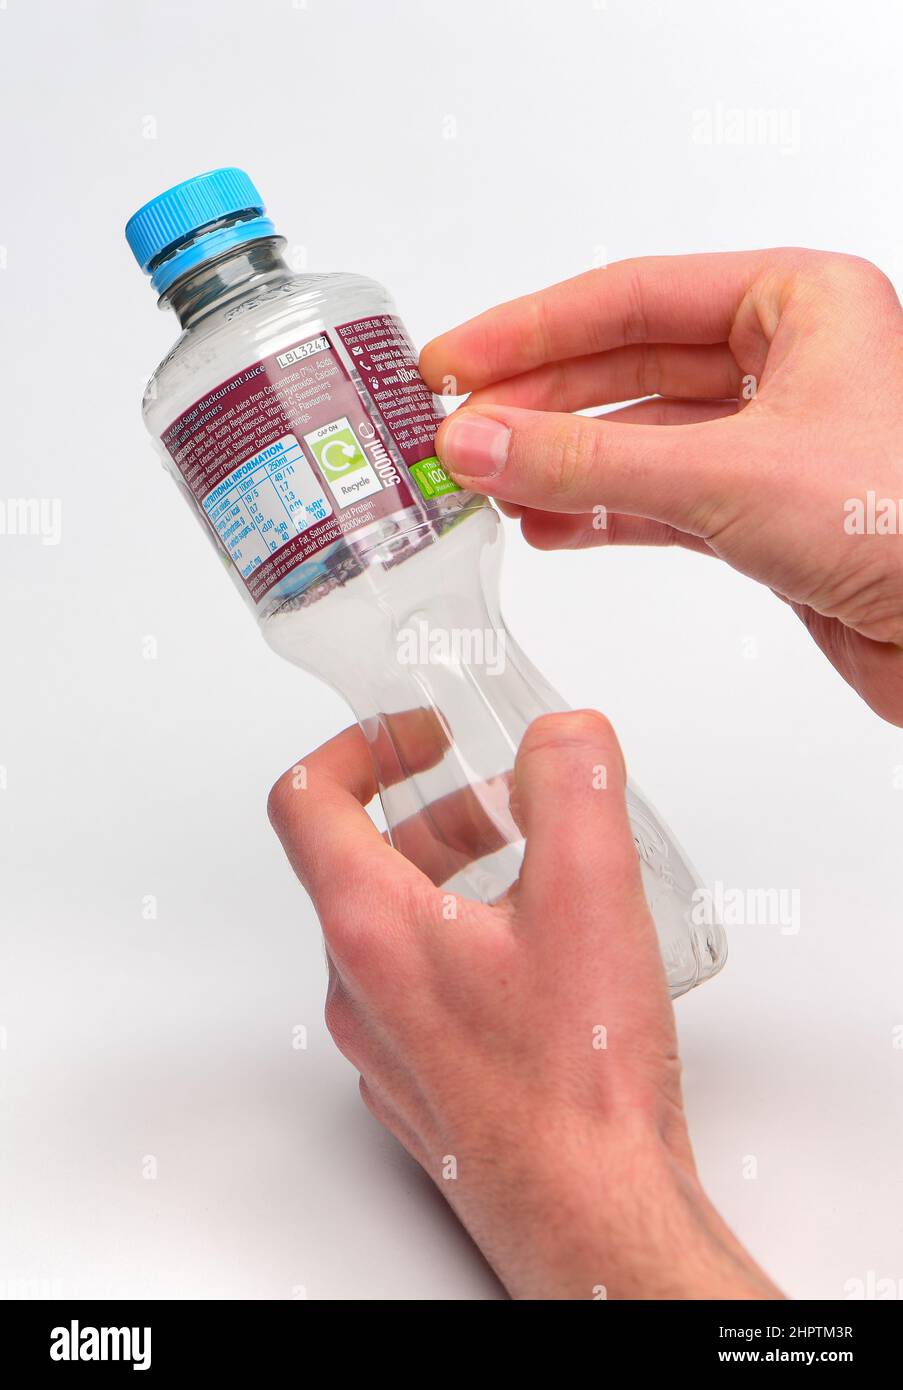 Removing label for recycling on a single use plastic bottle, bottle has a Ribena label and is photographed against a white background. Stock Photo